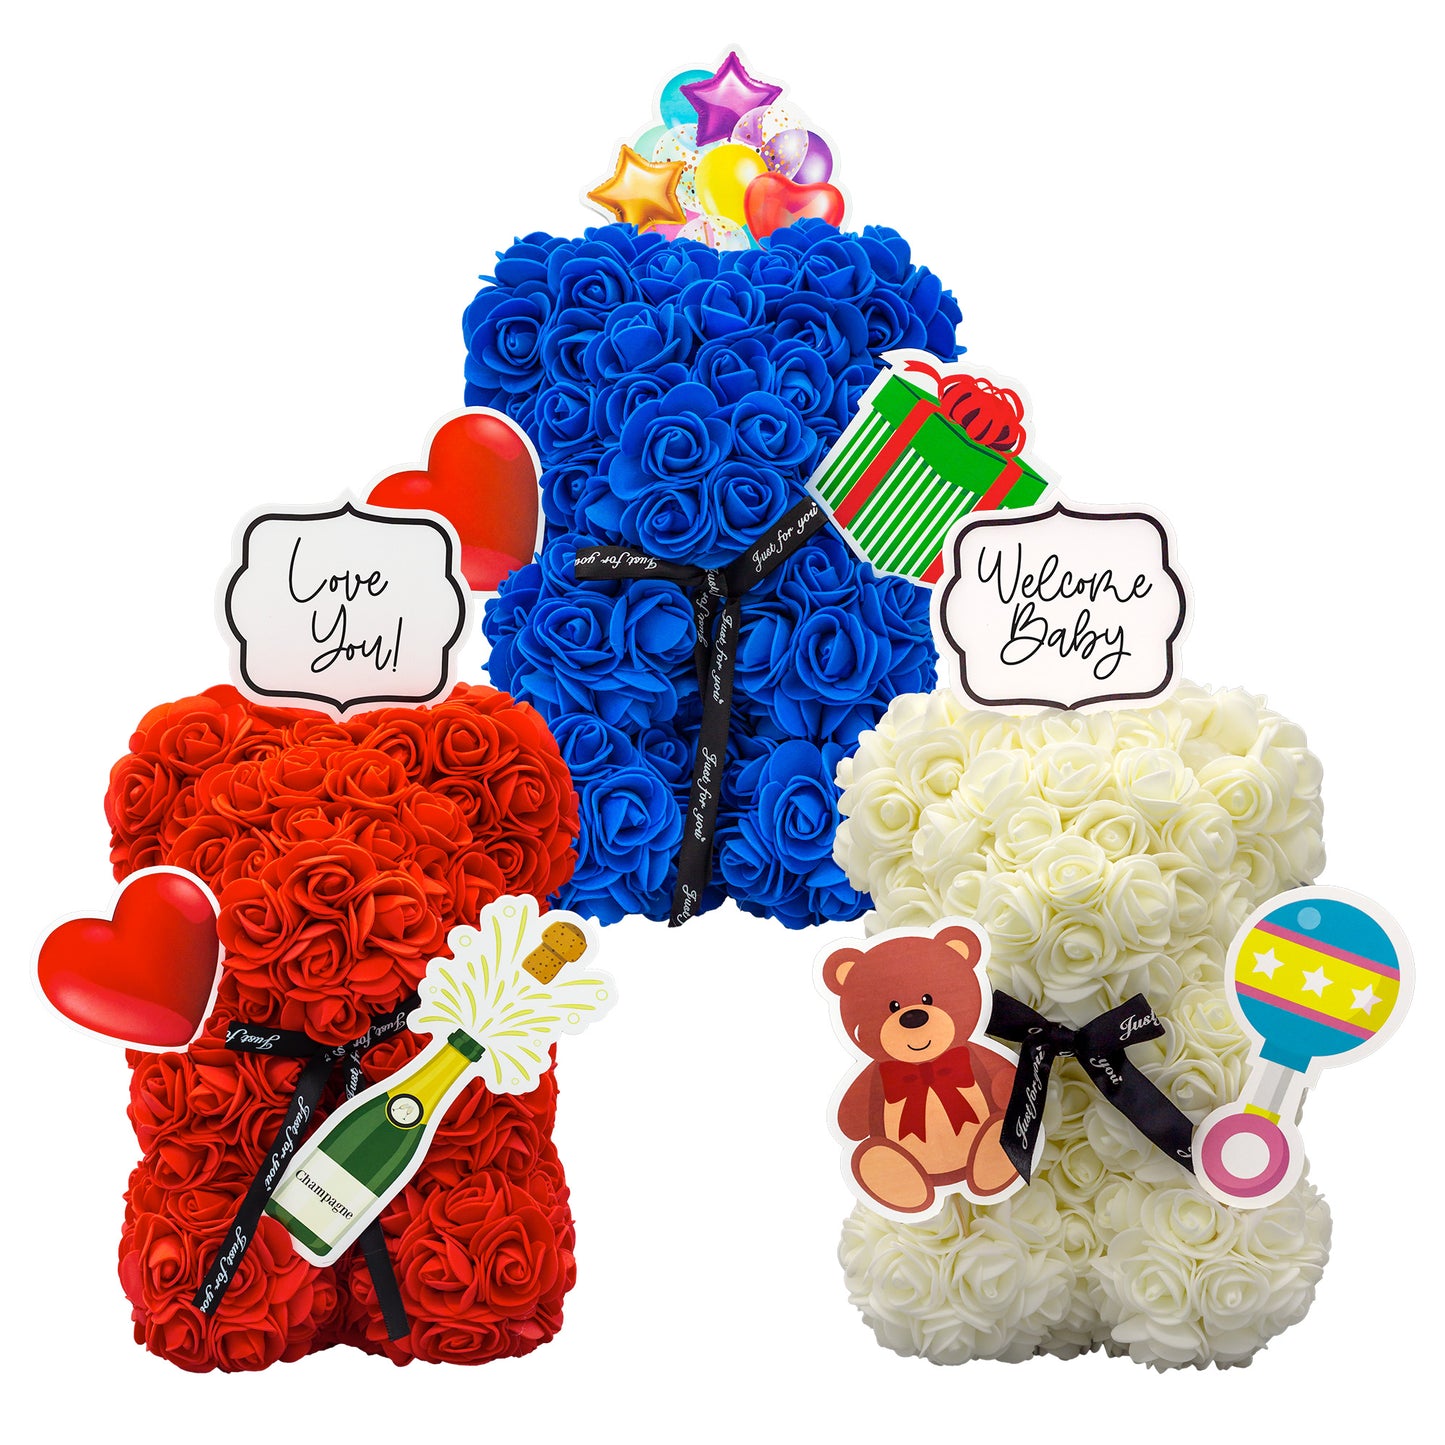 Three foam covered flower bears each with a different color and various decorations attached of different celebrations such as birthdays, anniversaries and baby showers